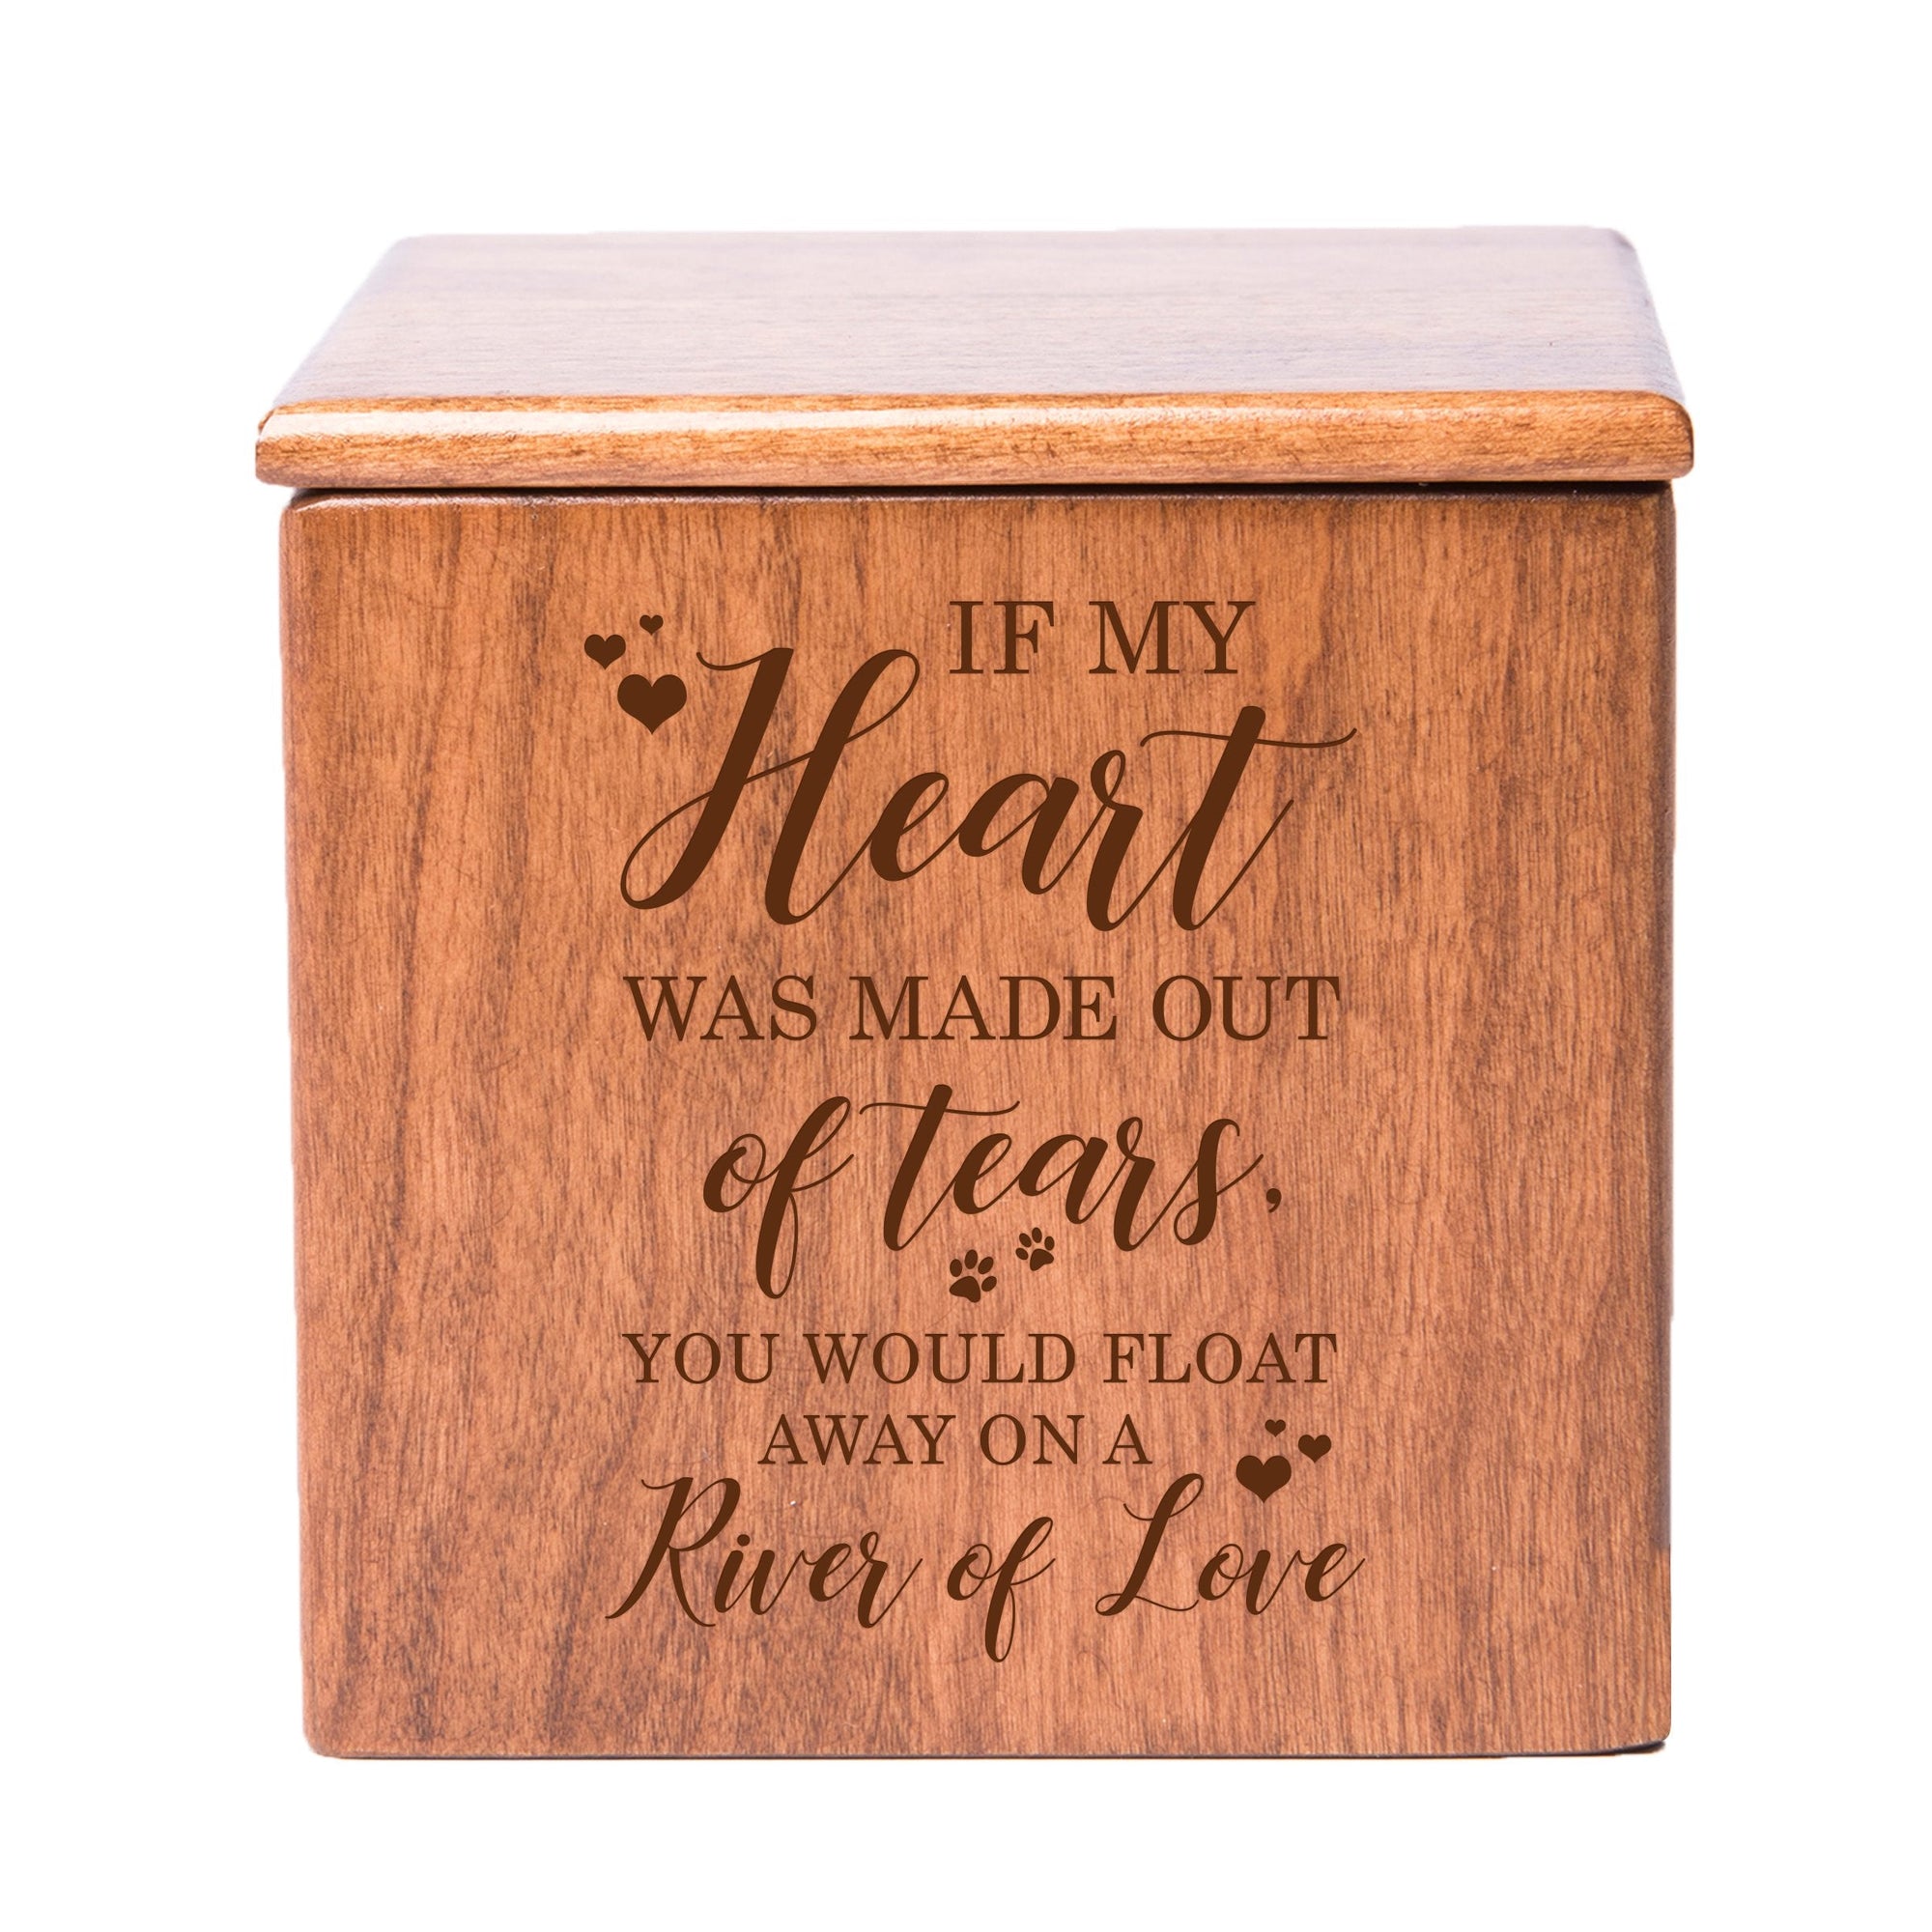 Cherry Pet Memorial 3.5x3.5 Keepsake Urn with phrase "If My Heart Was Made Out of Tears"